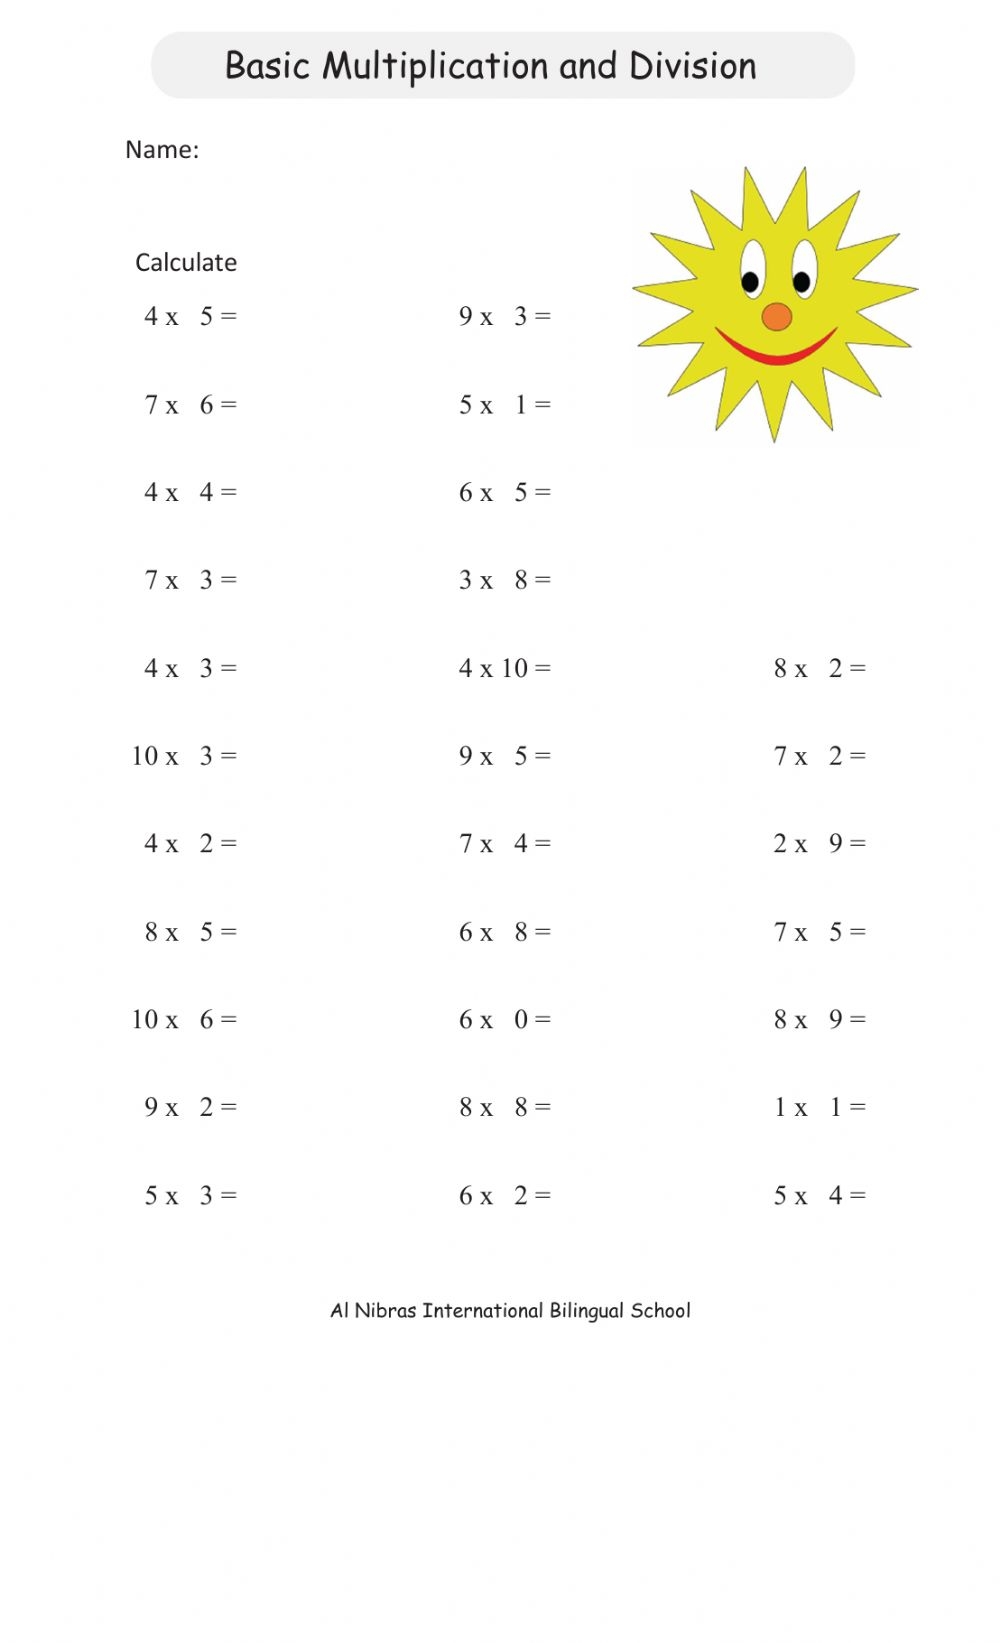 multiplication-and-division-facts-worksheets-printable-worksheets